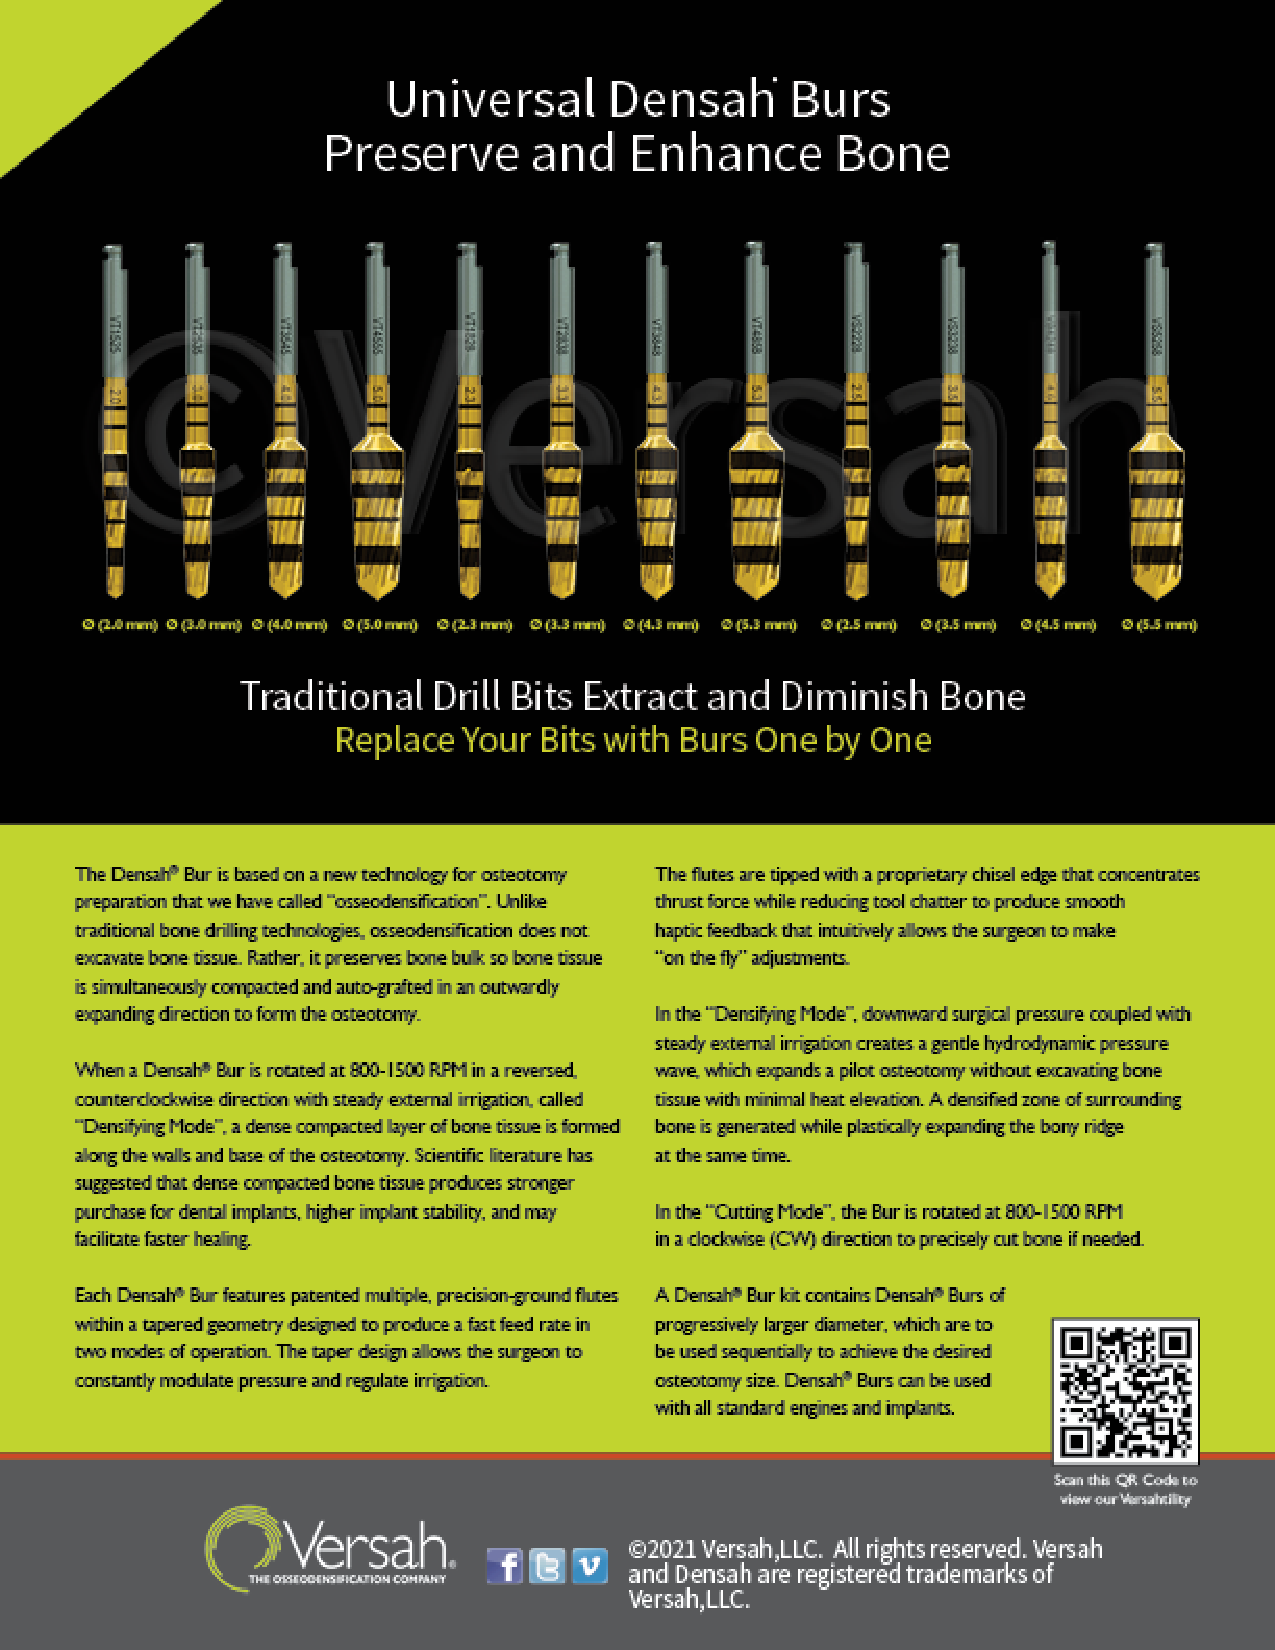 Universal Densah Burs, traditional drill bits Extract and Diminish Bone, Replace your bits